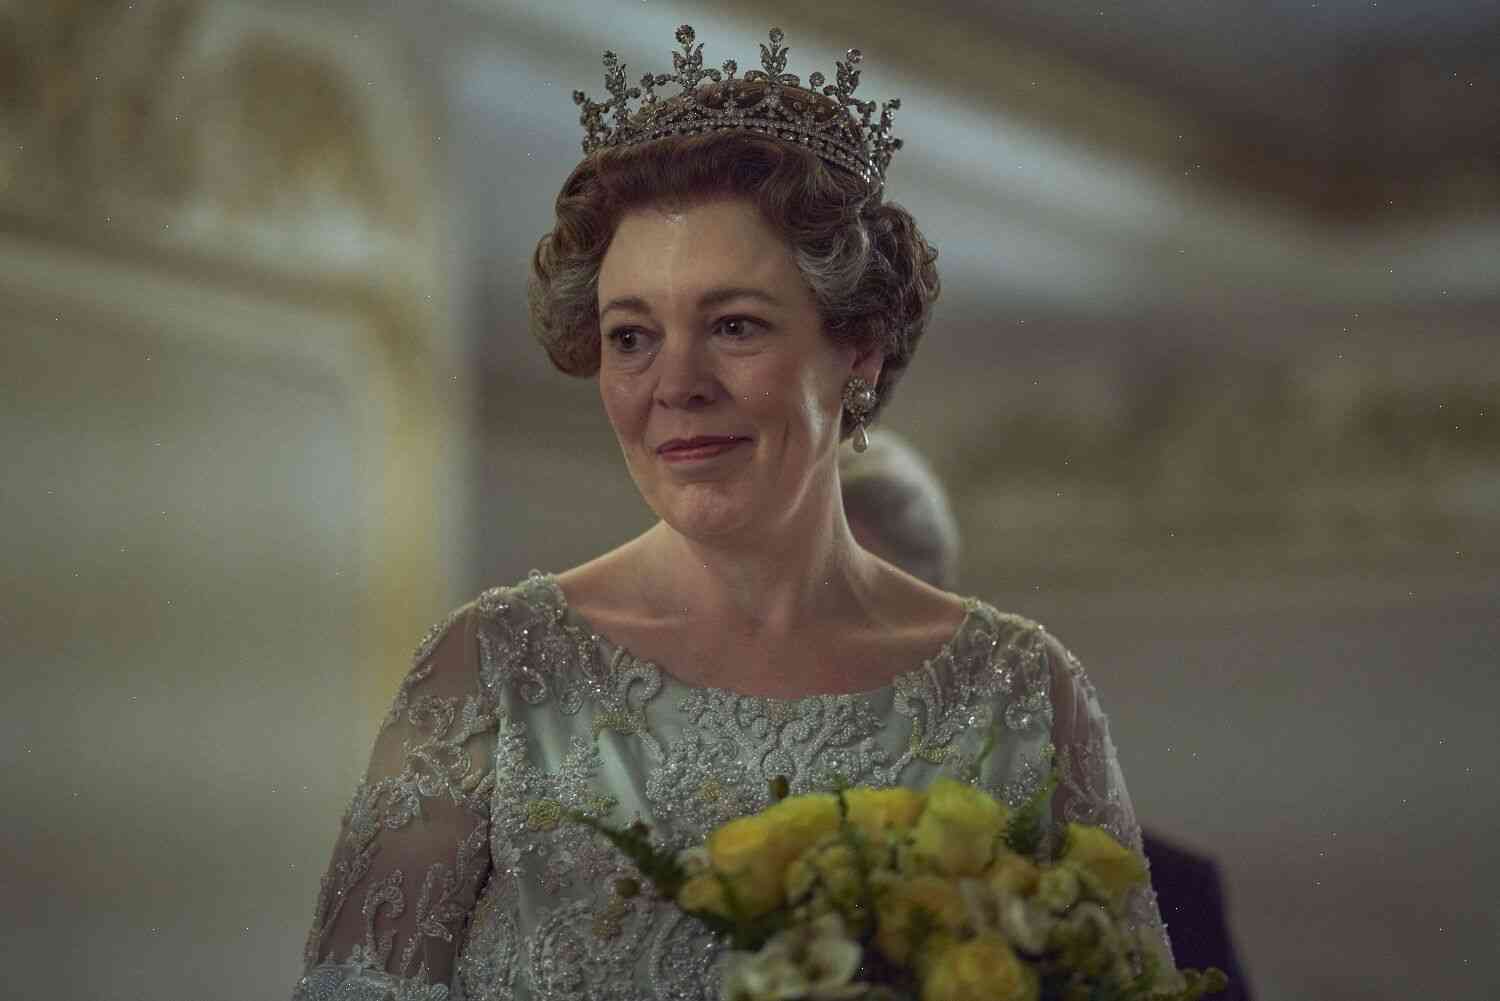 The Crown is a non-fictional character with a very real, but non-real, history